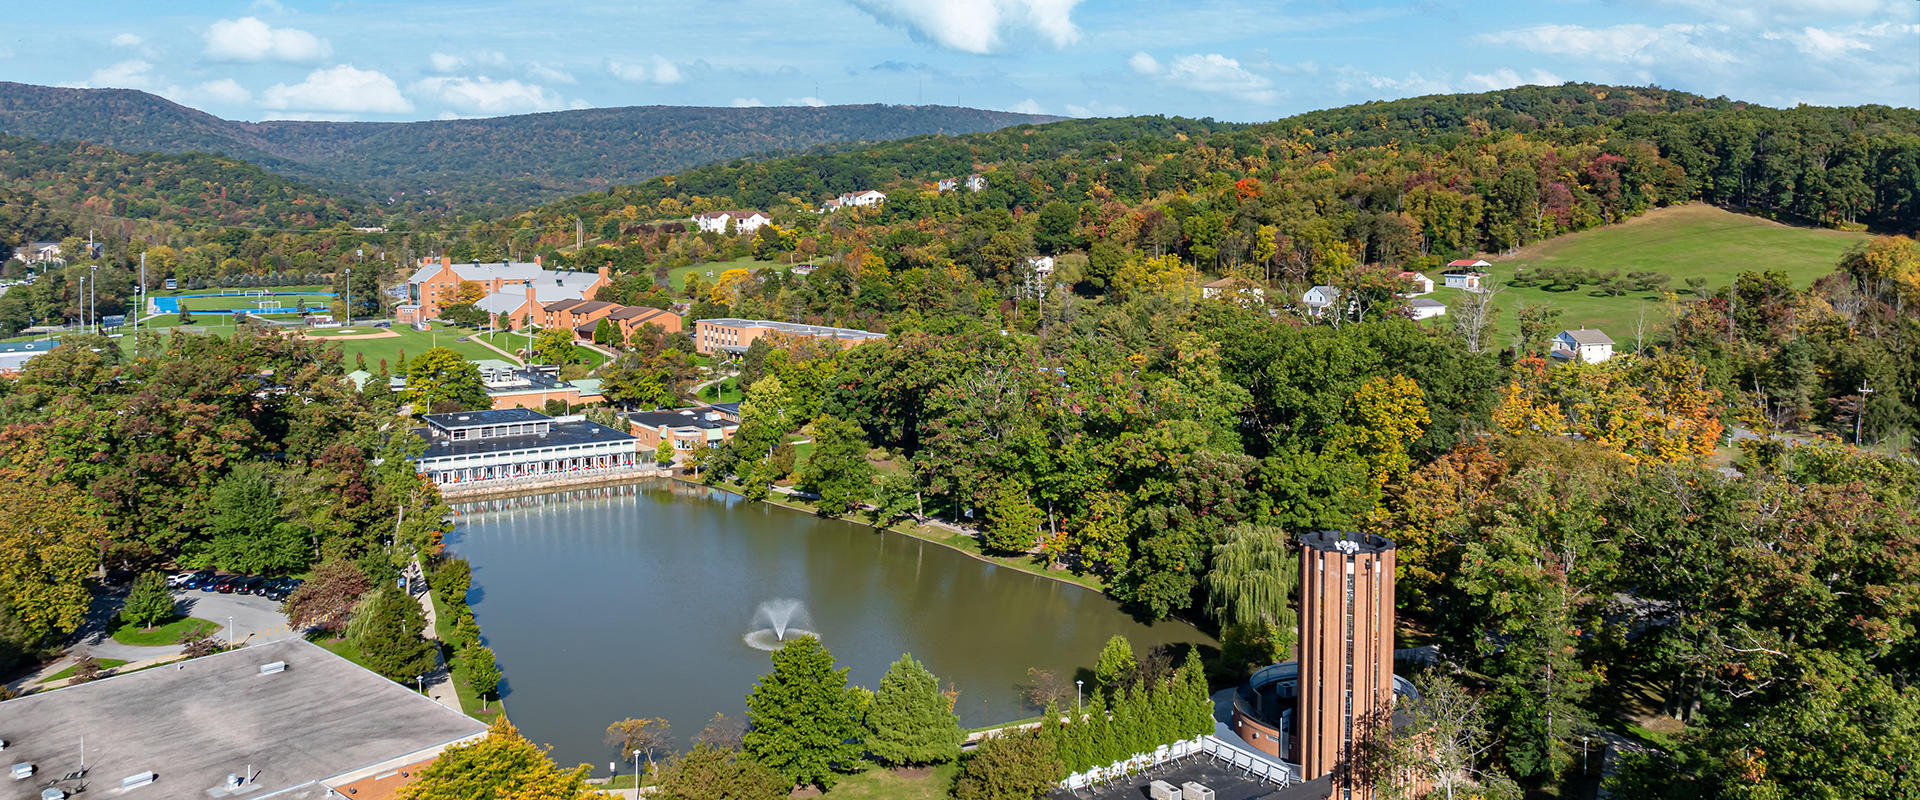 Drone photo of Penn State Altoona campus in early autumn